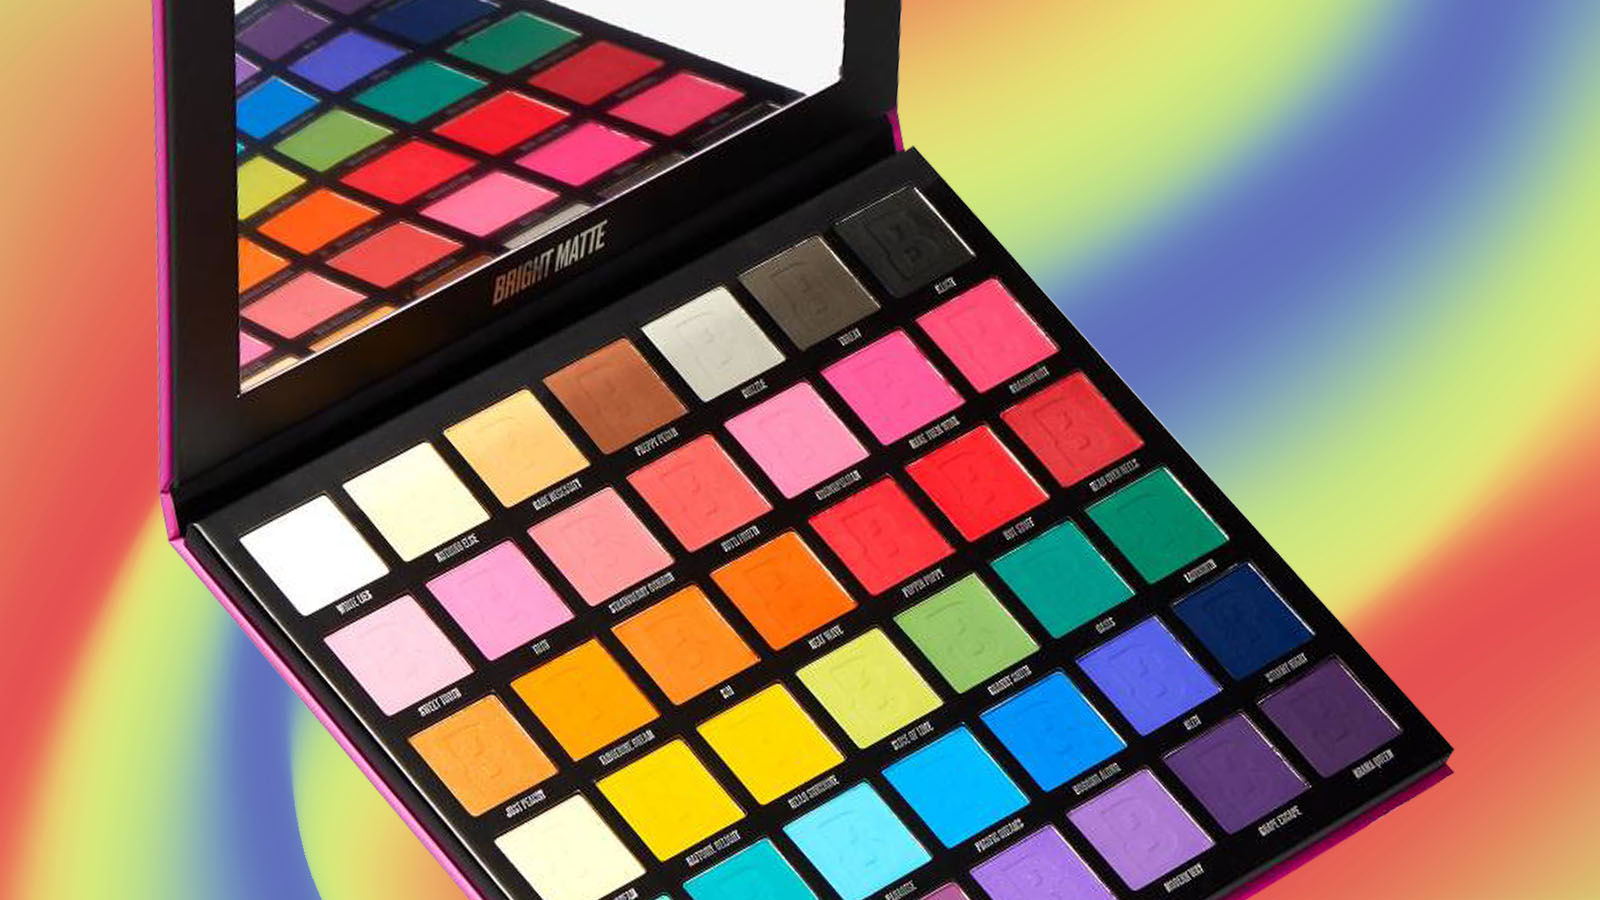 The Best Matte Eyeshadow Palettes - Beauty Bay Edited